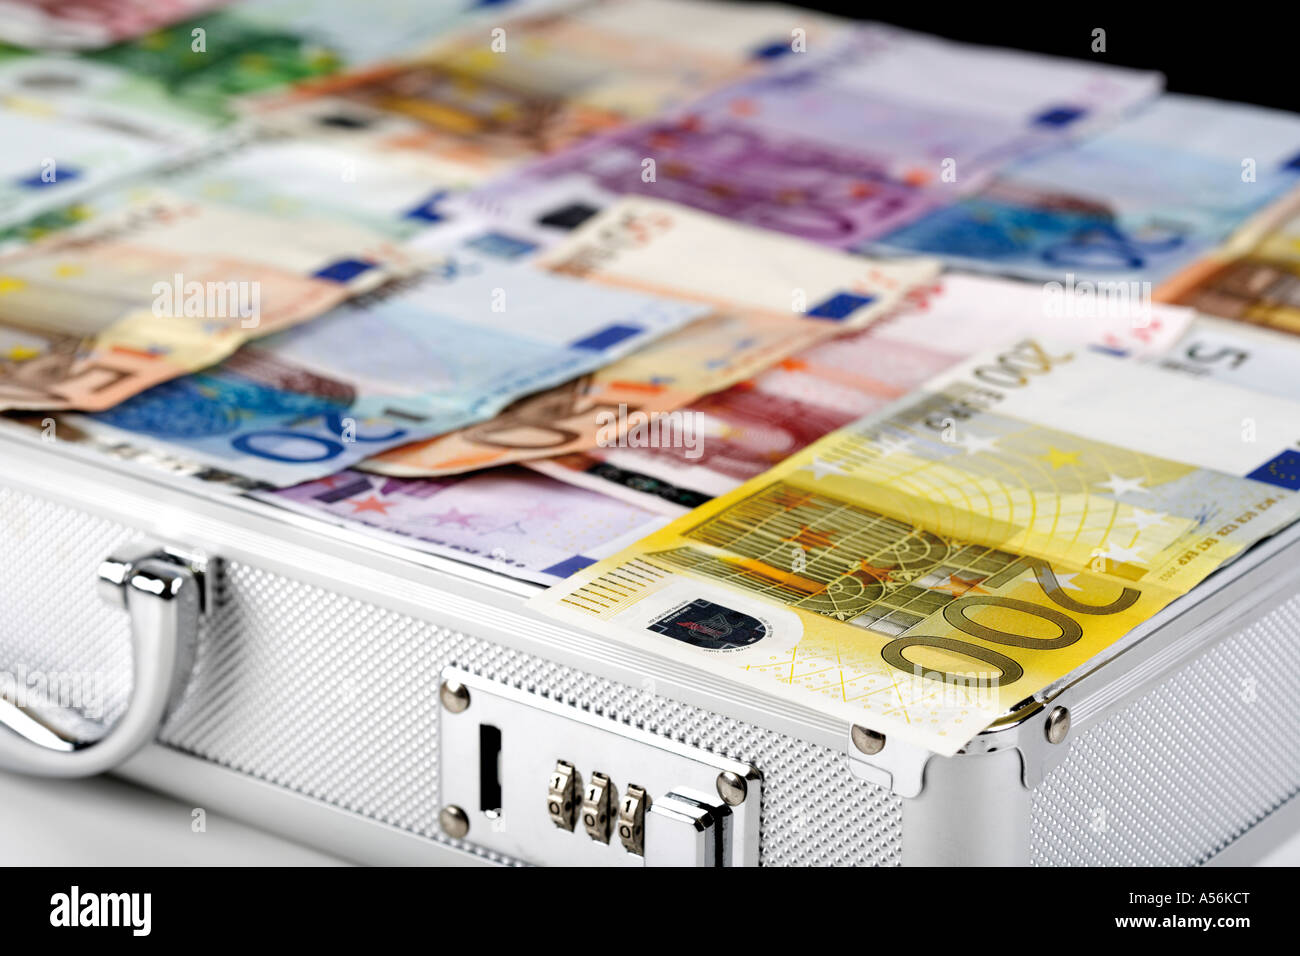 Euro bank notes in case, close-up Stock Photo